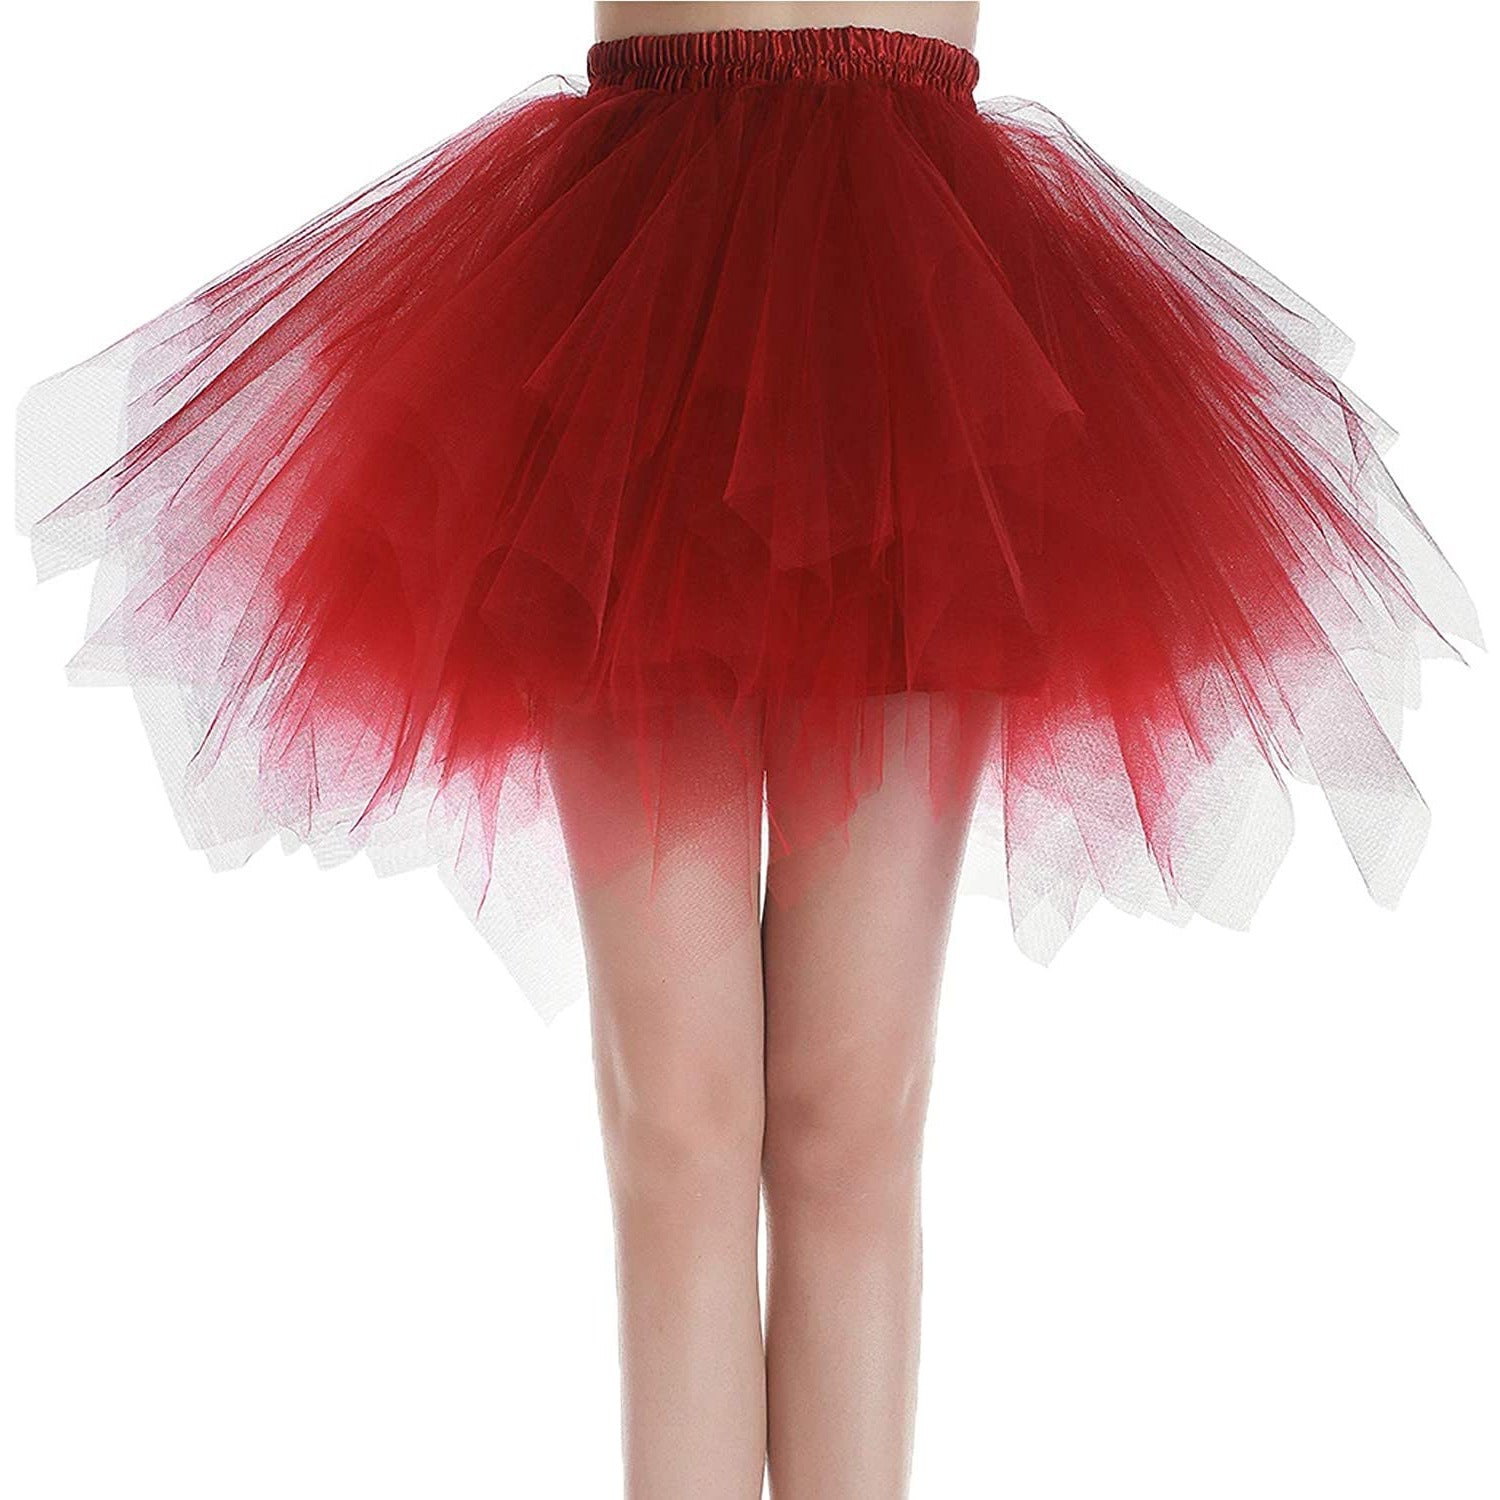 Tutu Skirt for Adults